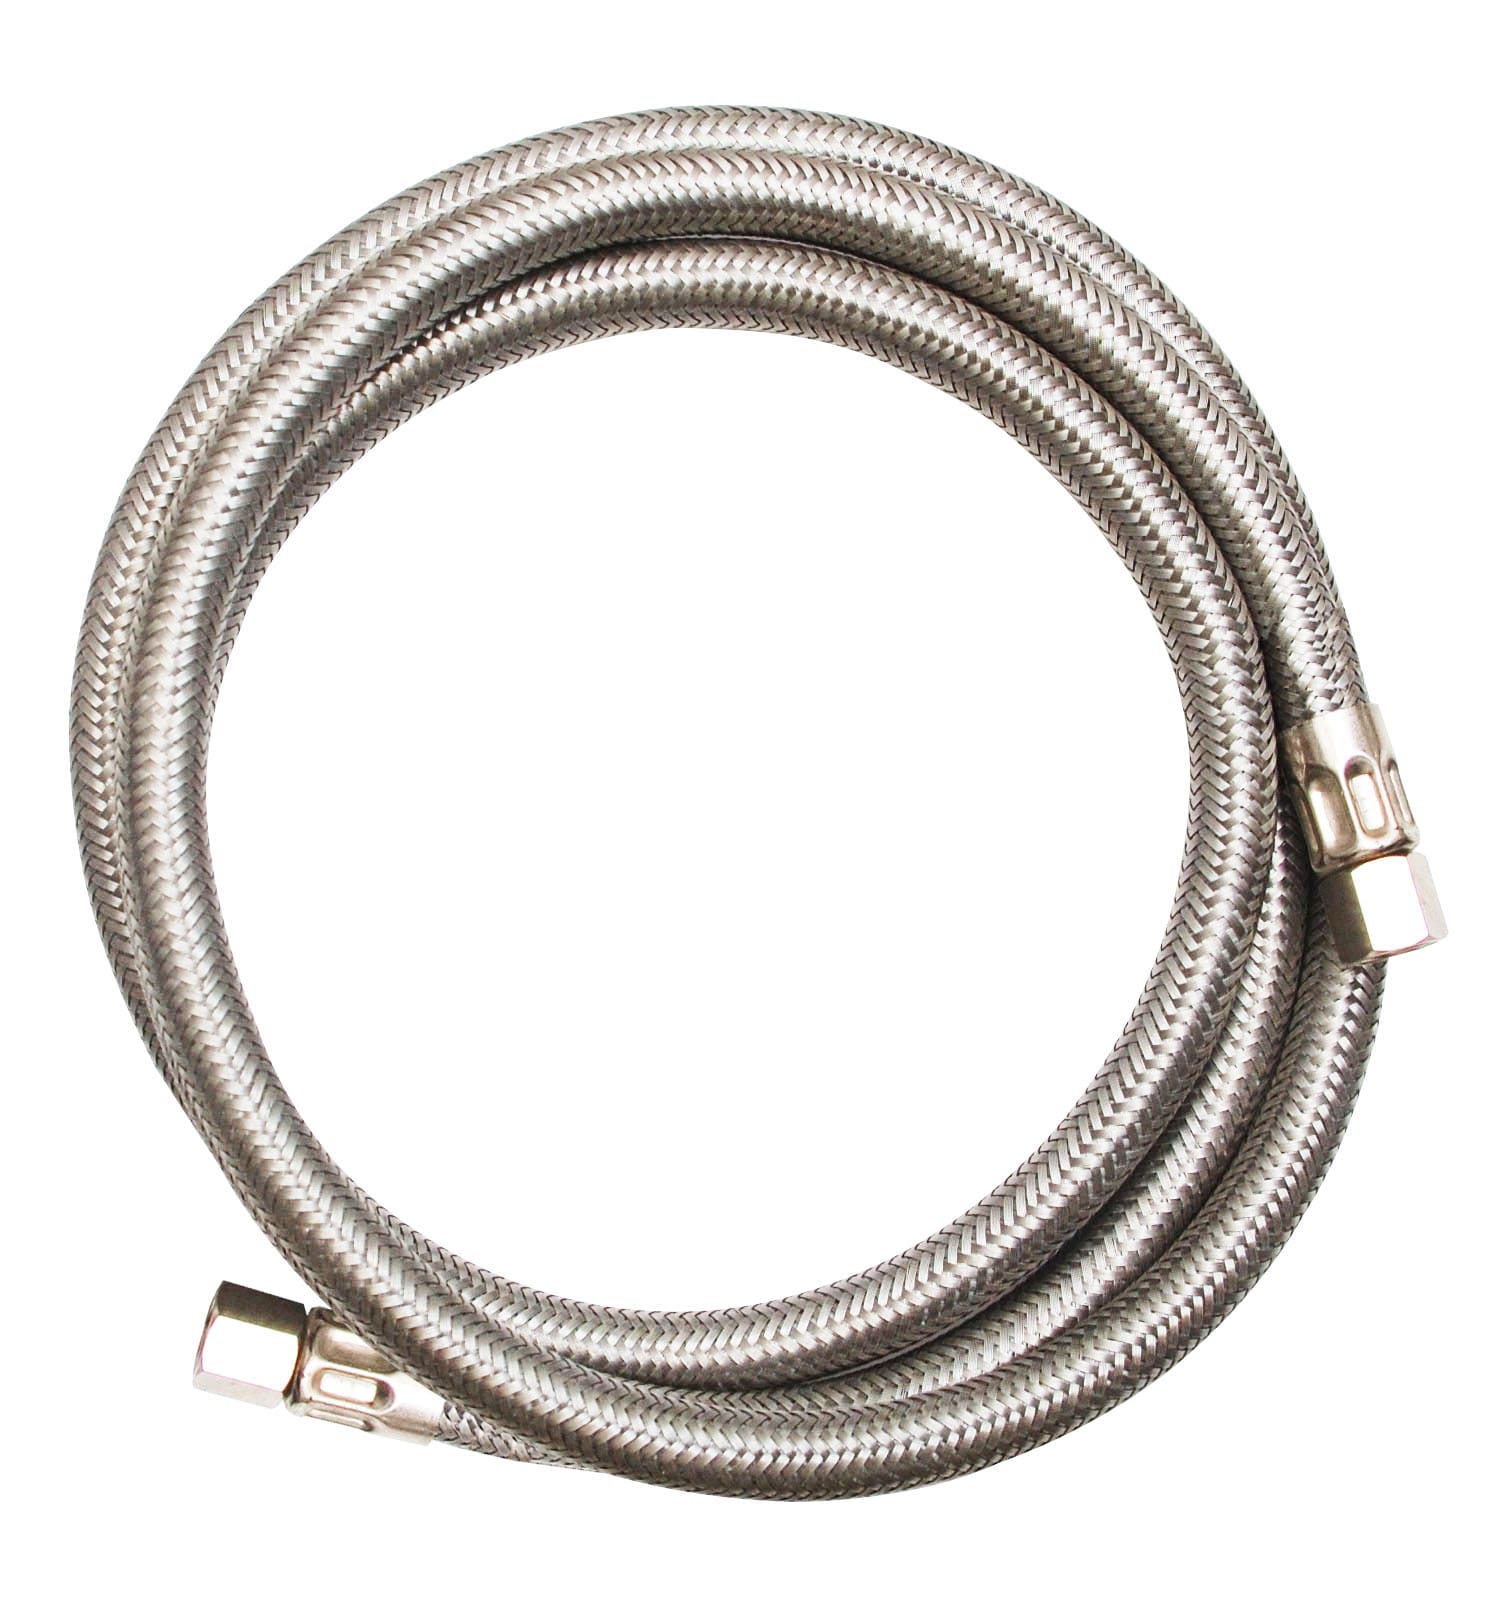 Eastman Ice Maker Connector 10 Foot Stainless Steel Hose